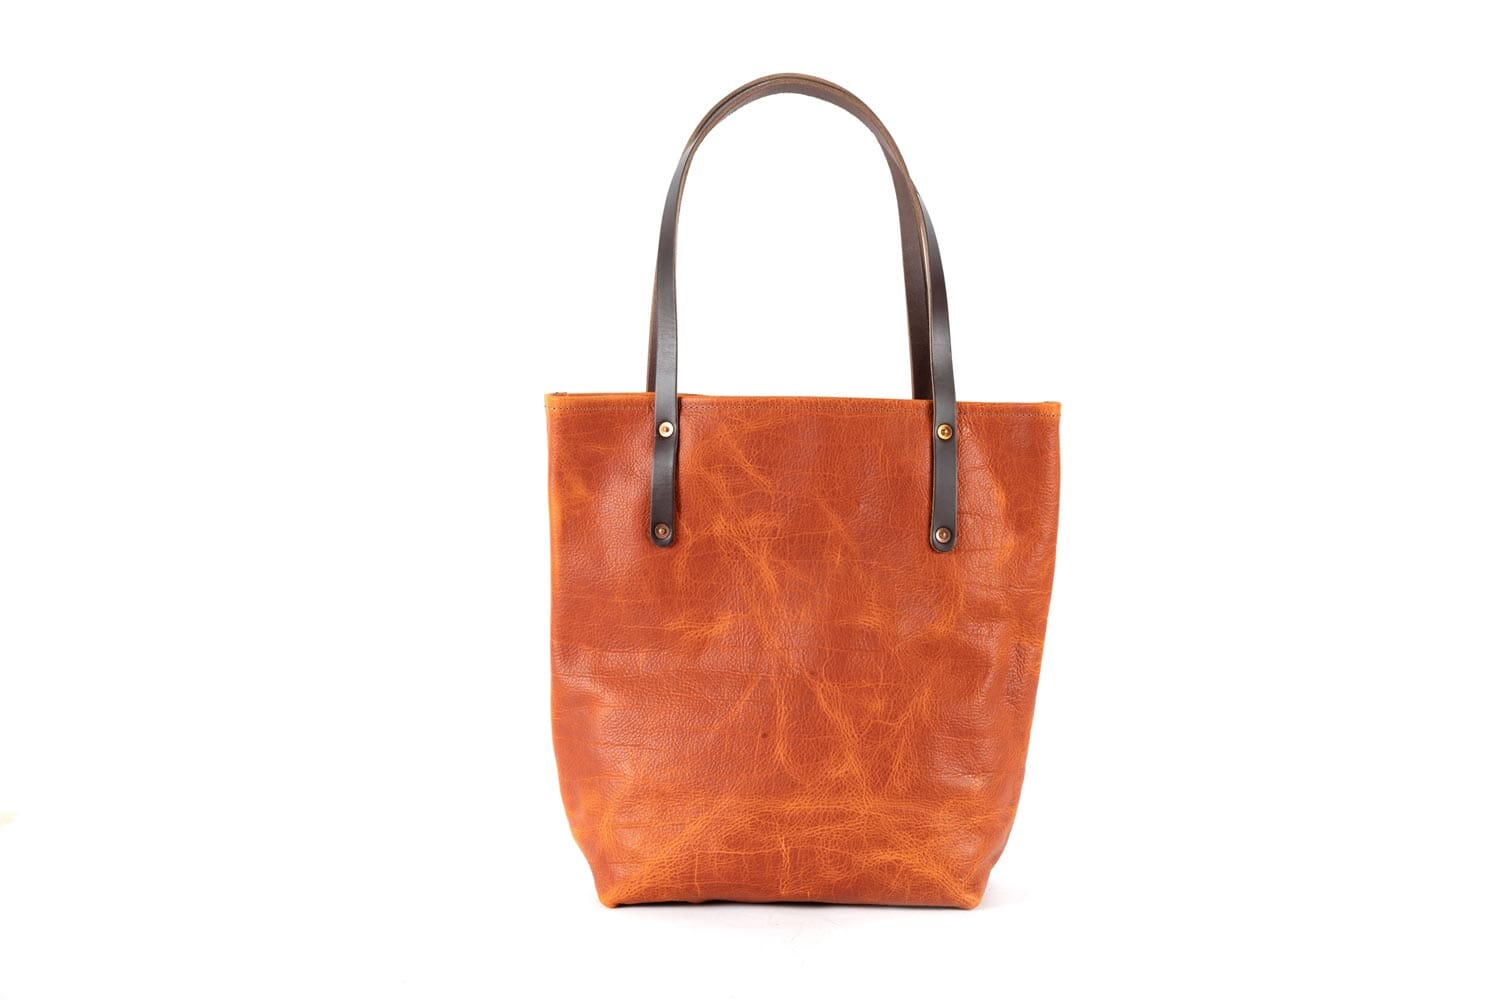 AVERY LEATHER TOTE BAG - SLIM LARGE - TANGERINE BISON (RTS)